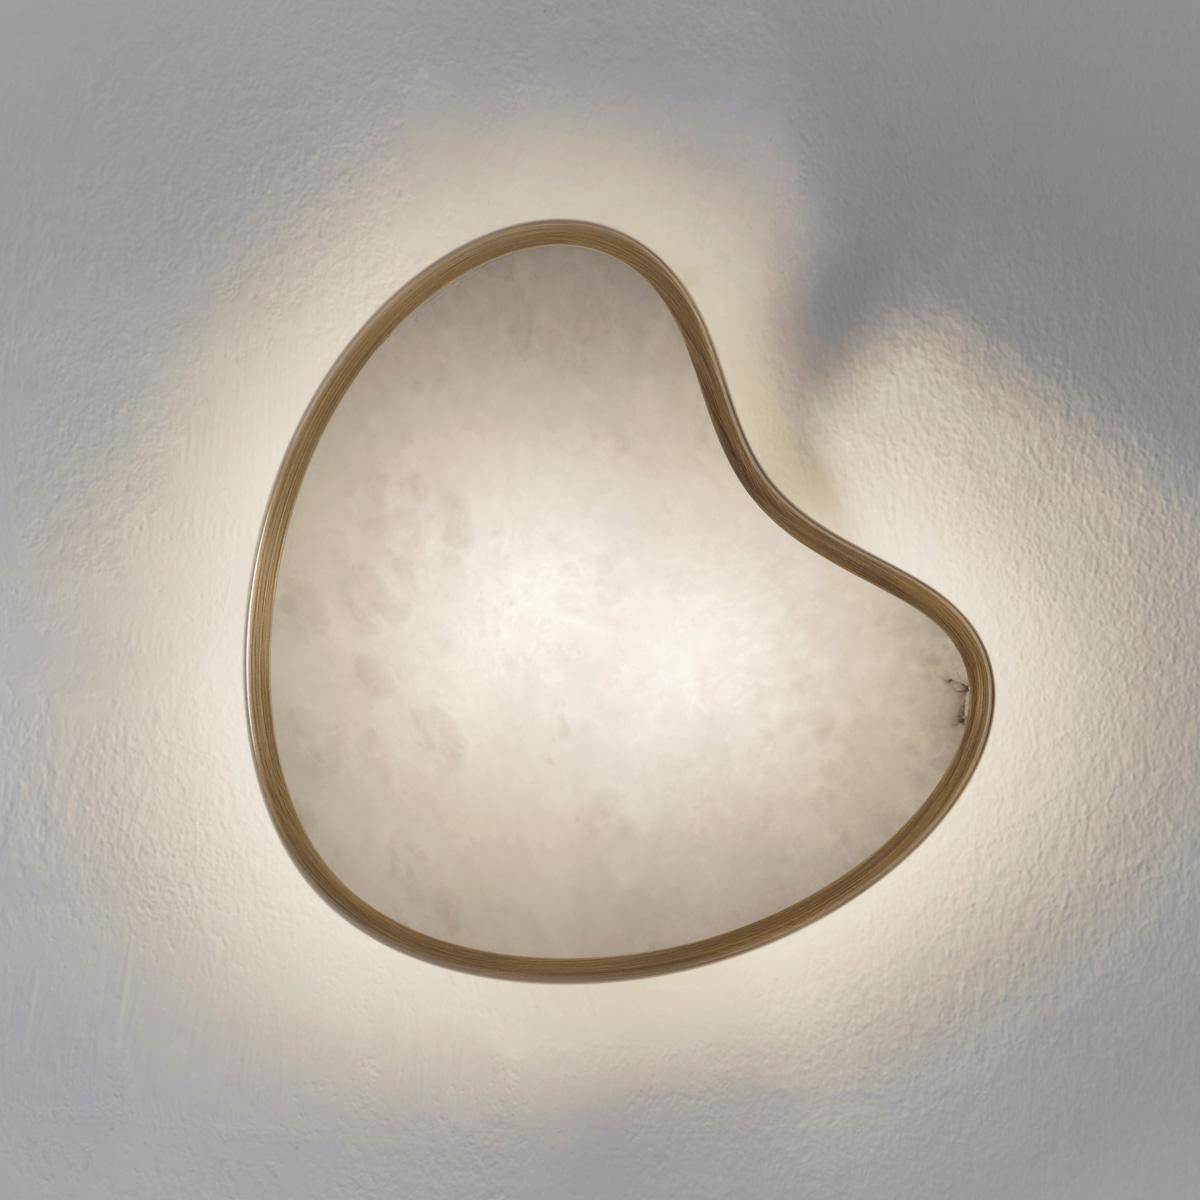 Modern Cuore Wall Light by Gaspare Asaro. Alabaster Version For Sale